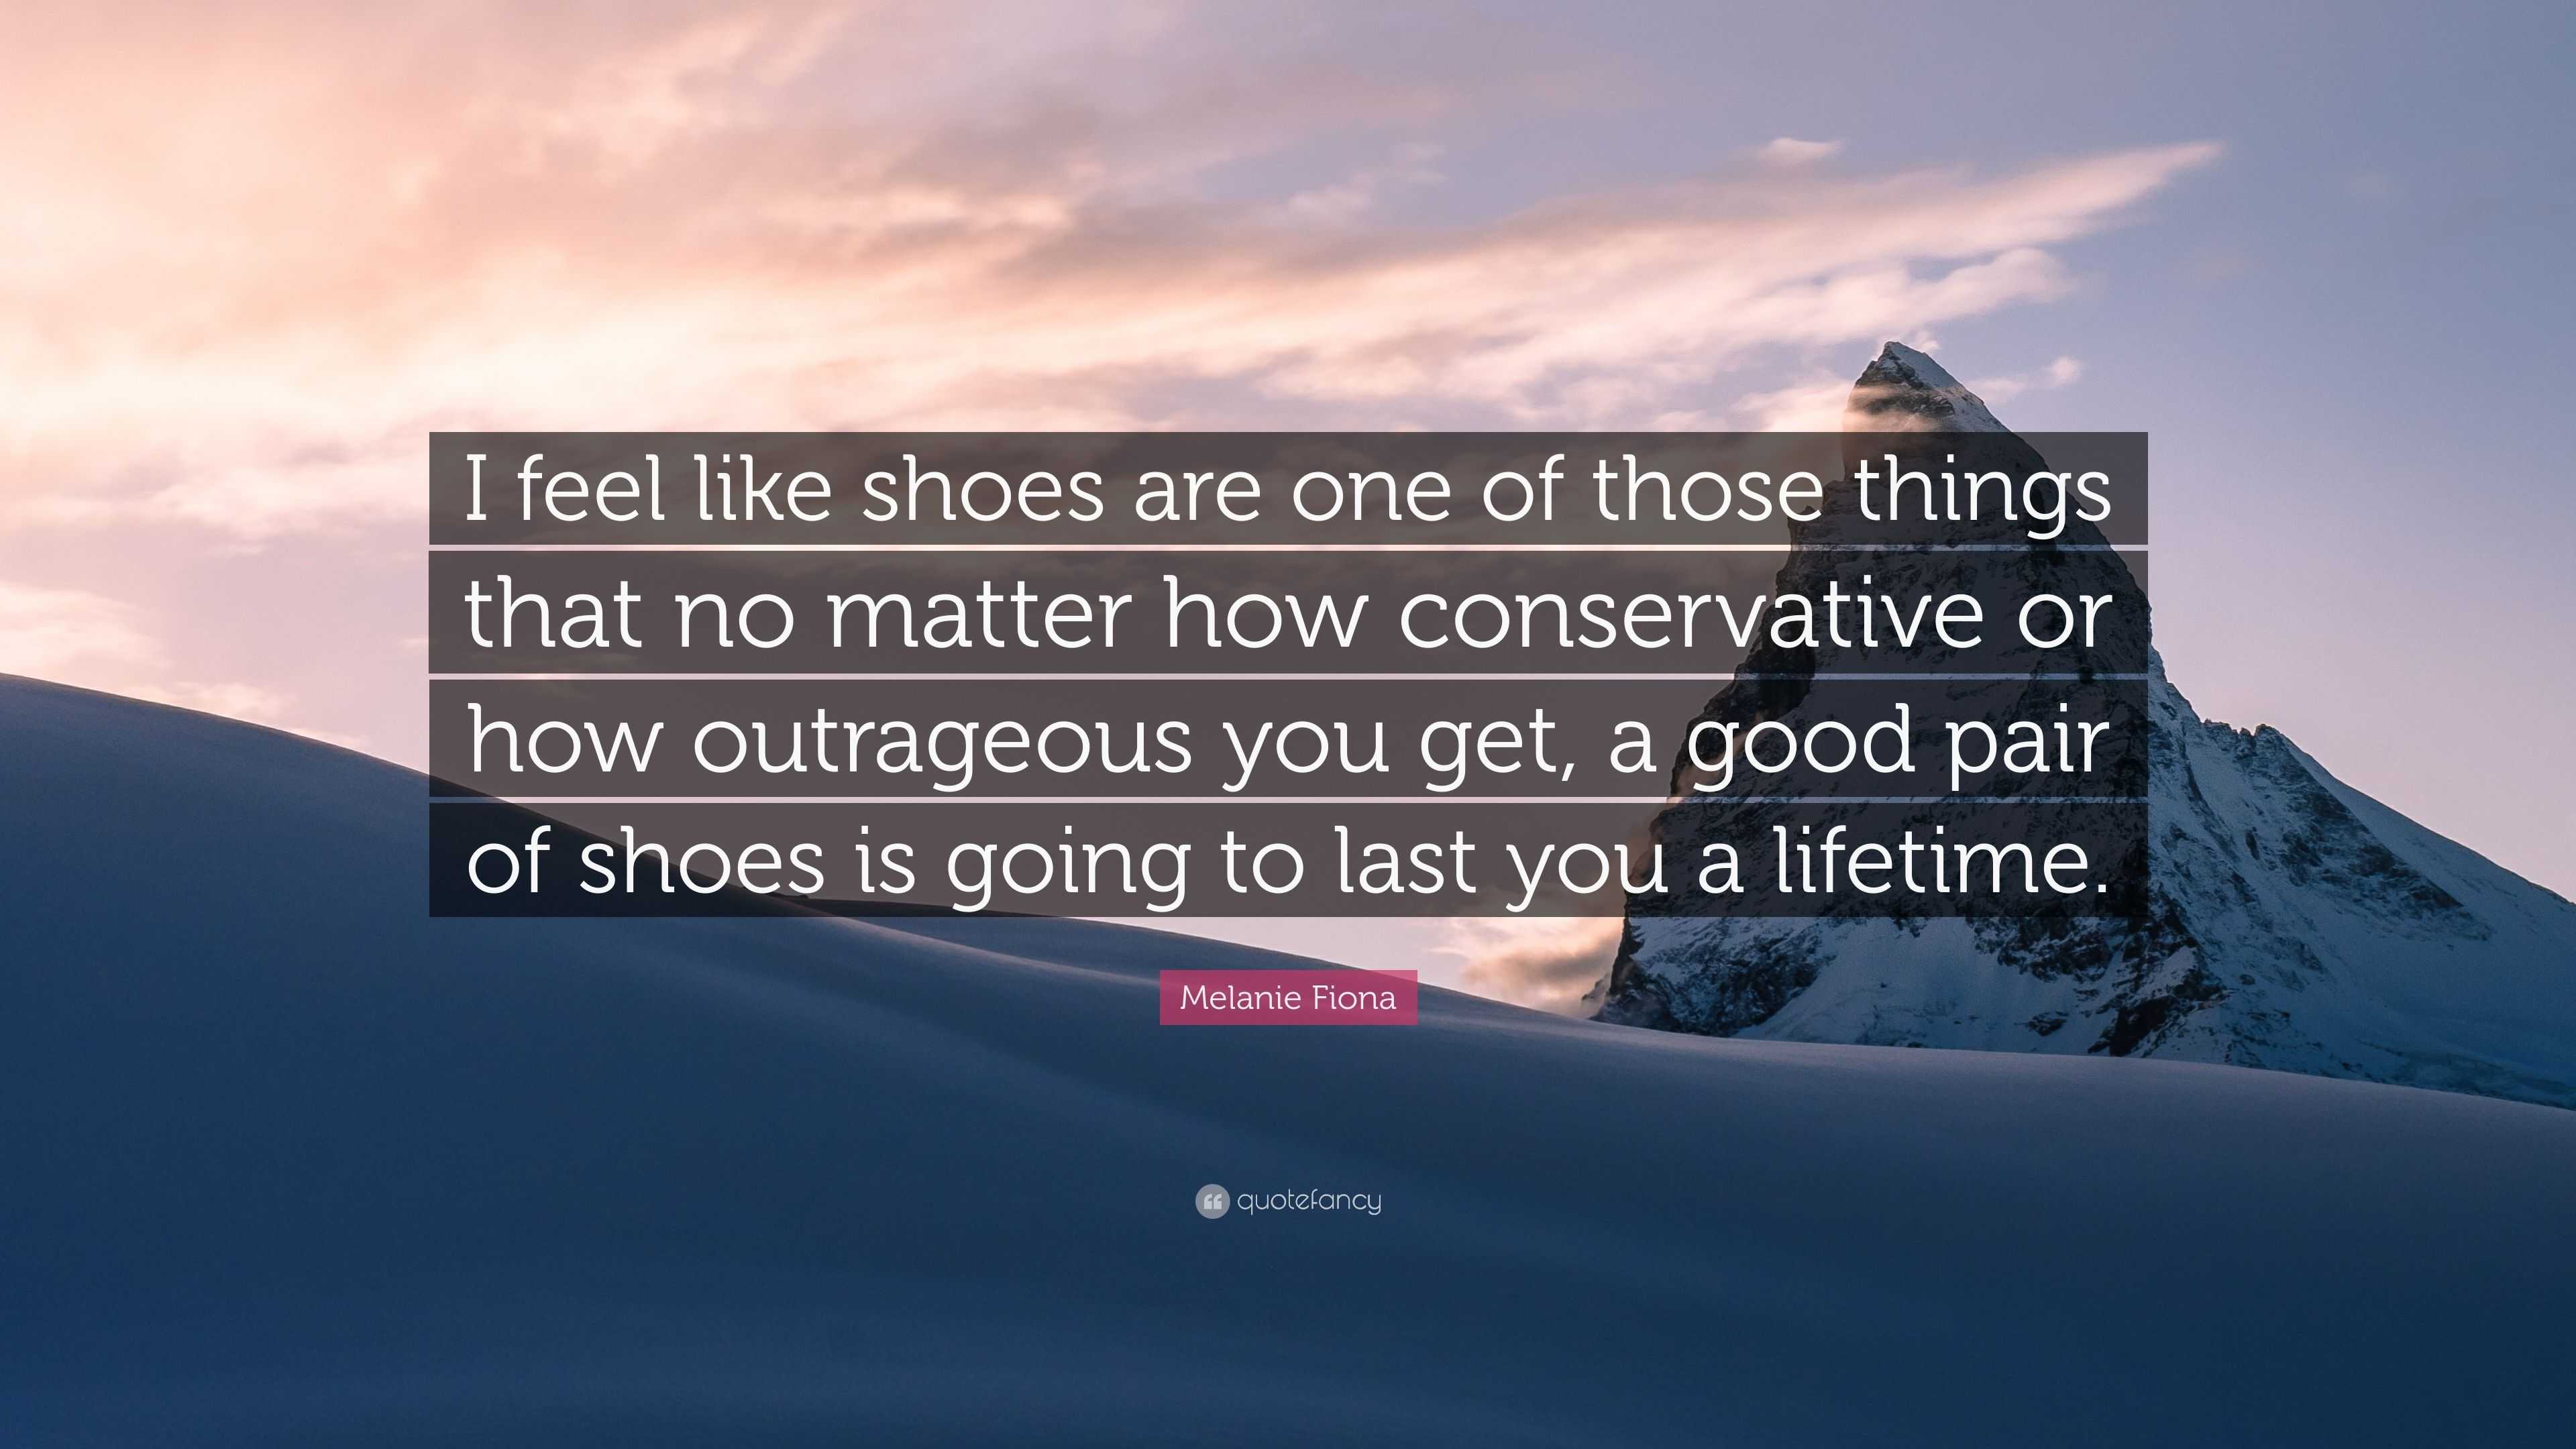 Melanie Fiona Quote: “I feel like shoes are one of those things that no  matter how conservative or how outrageous you get, a good pair of shoe”